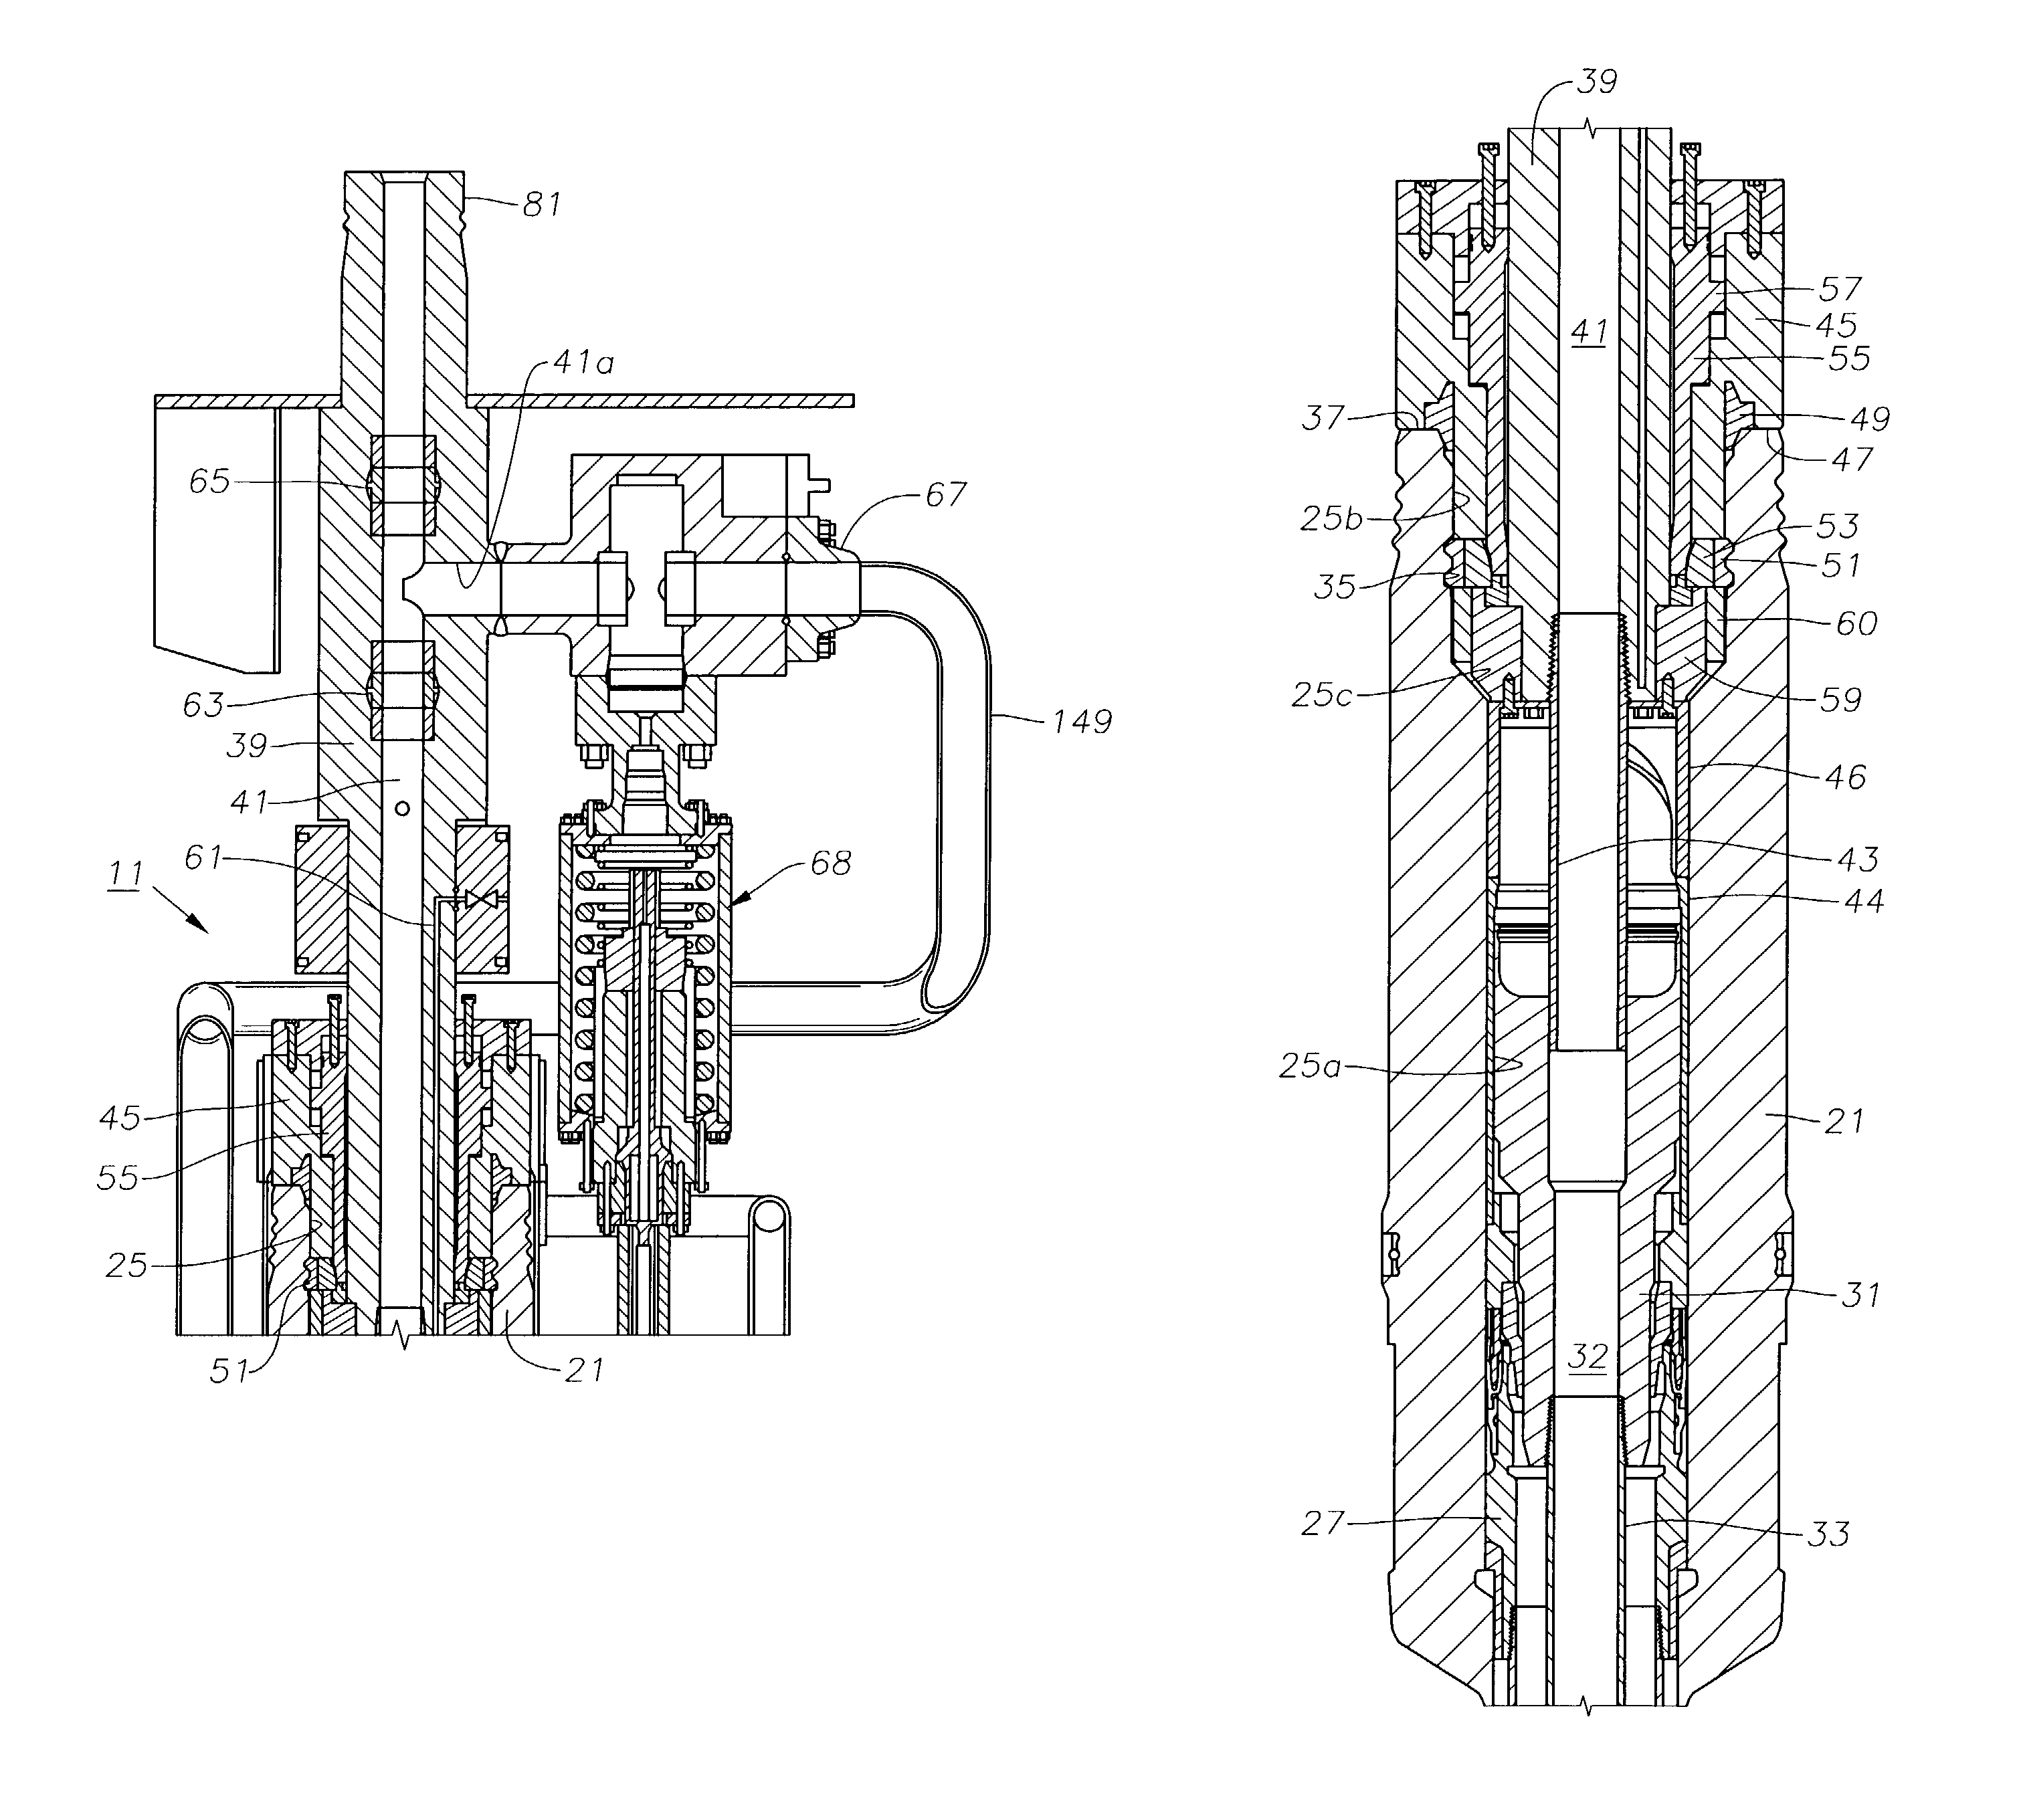 Internal connection of tree to wellhead housing